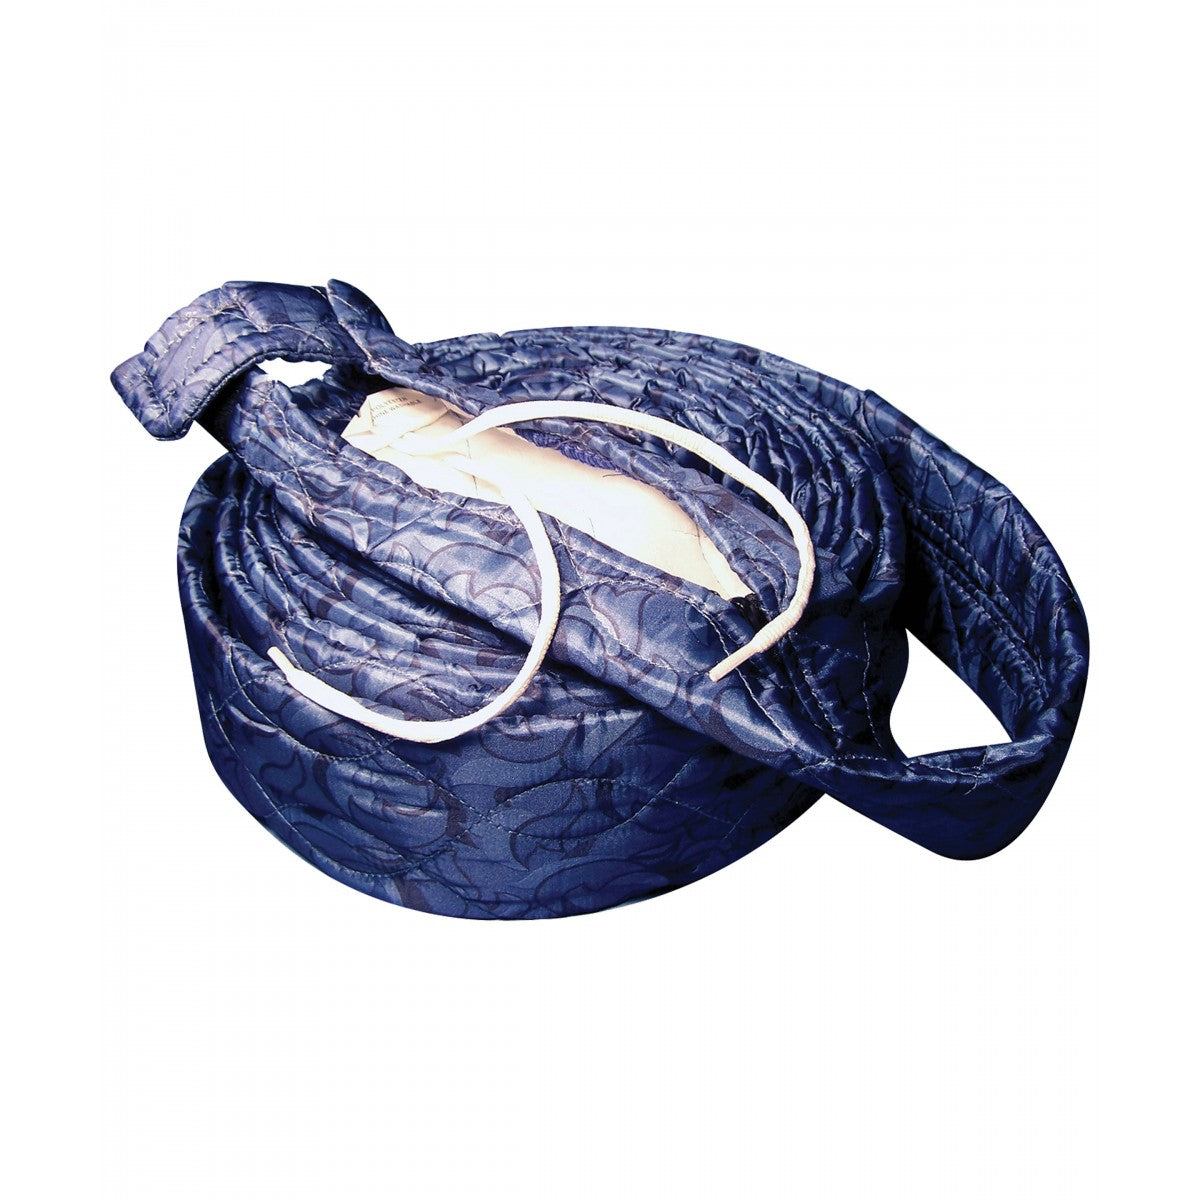 30' Padded Hose Cover With Zipper - Vacsoc - Blue